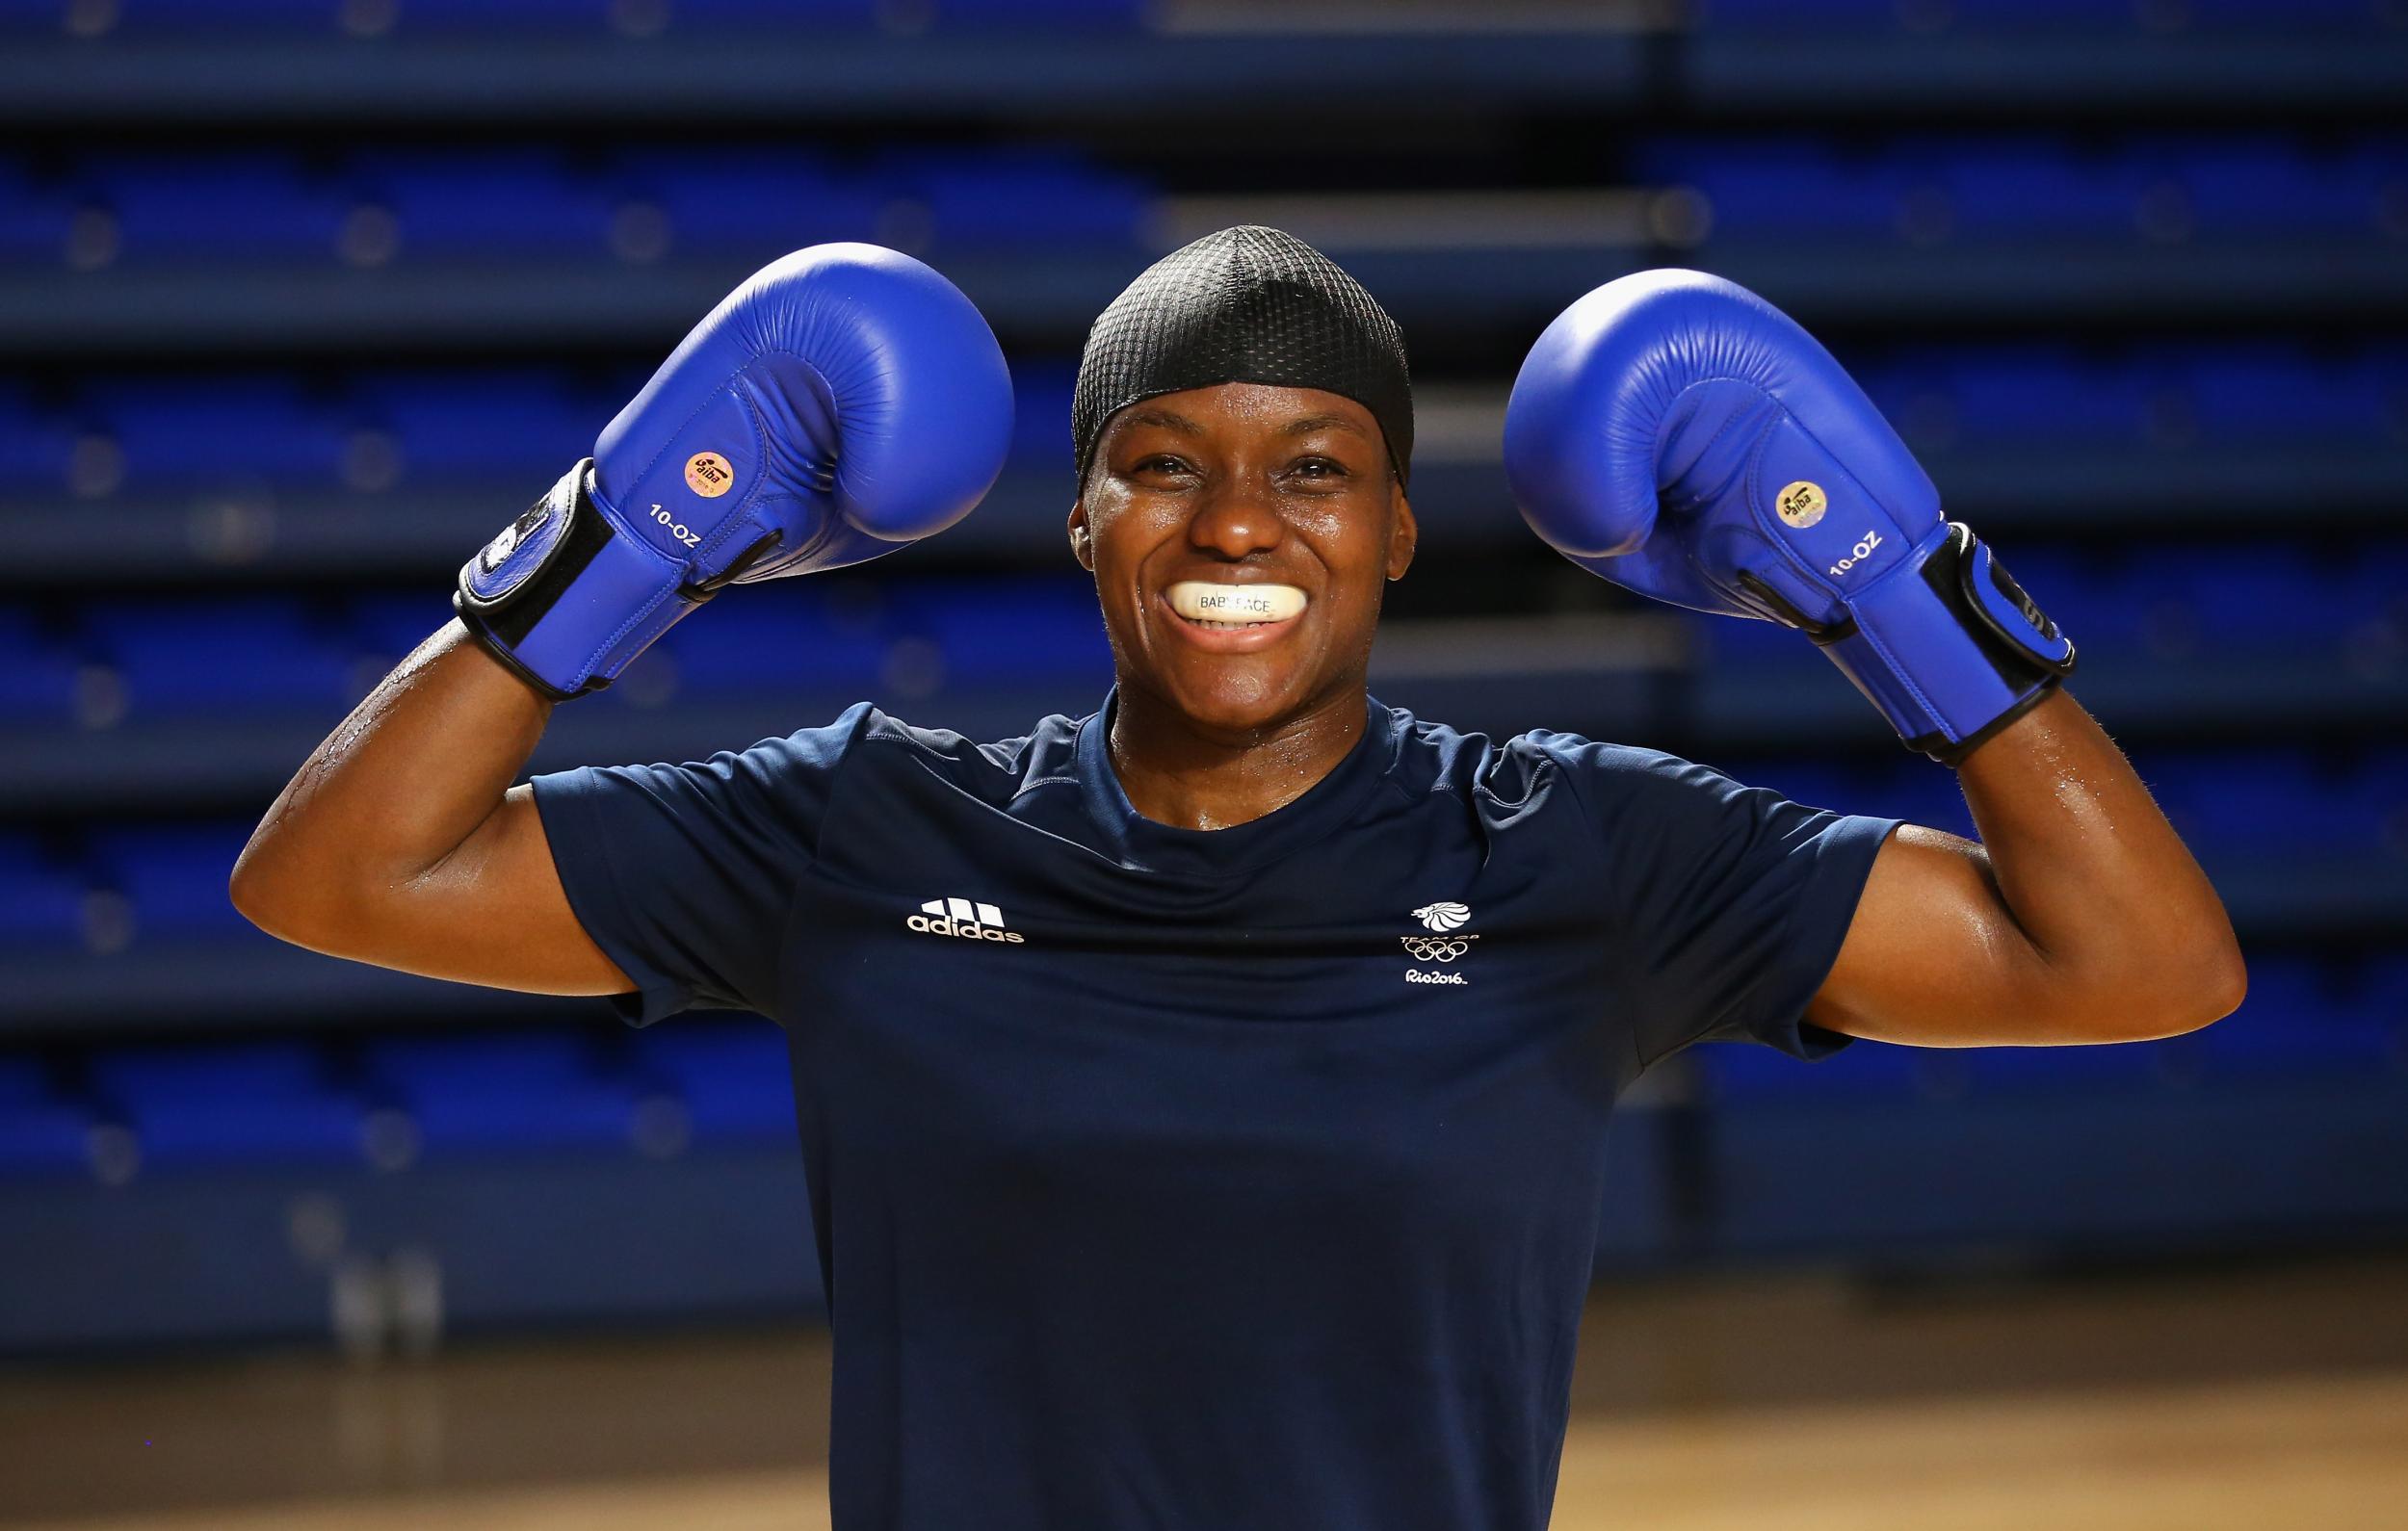 Nicola Adams is all set for her 2012 title defence